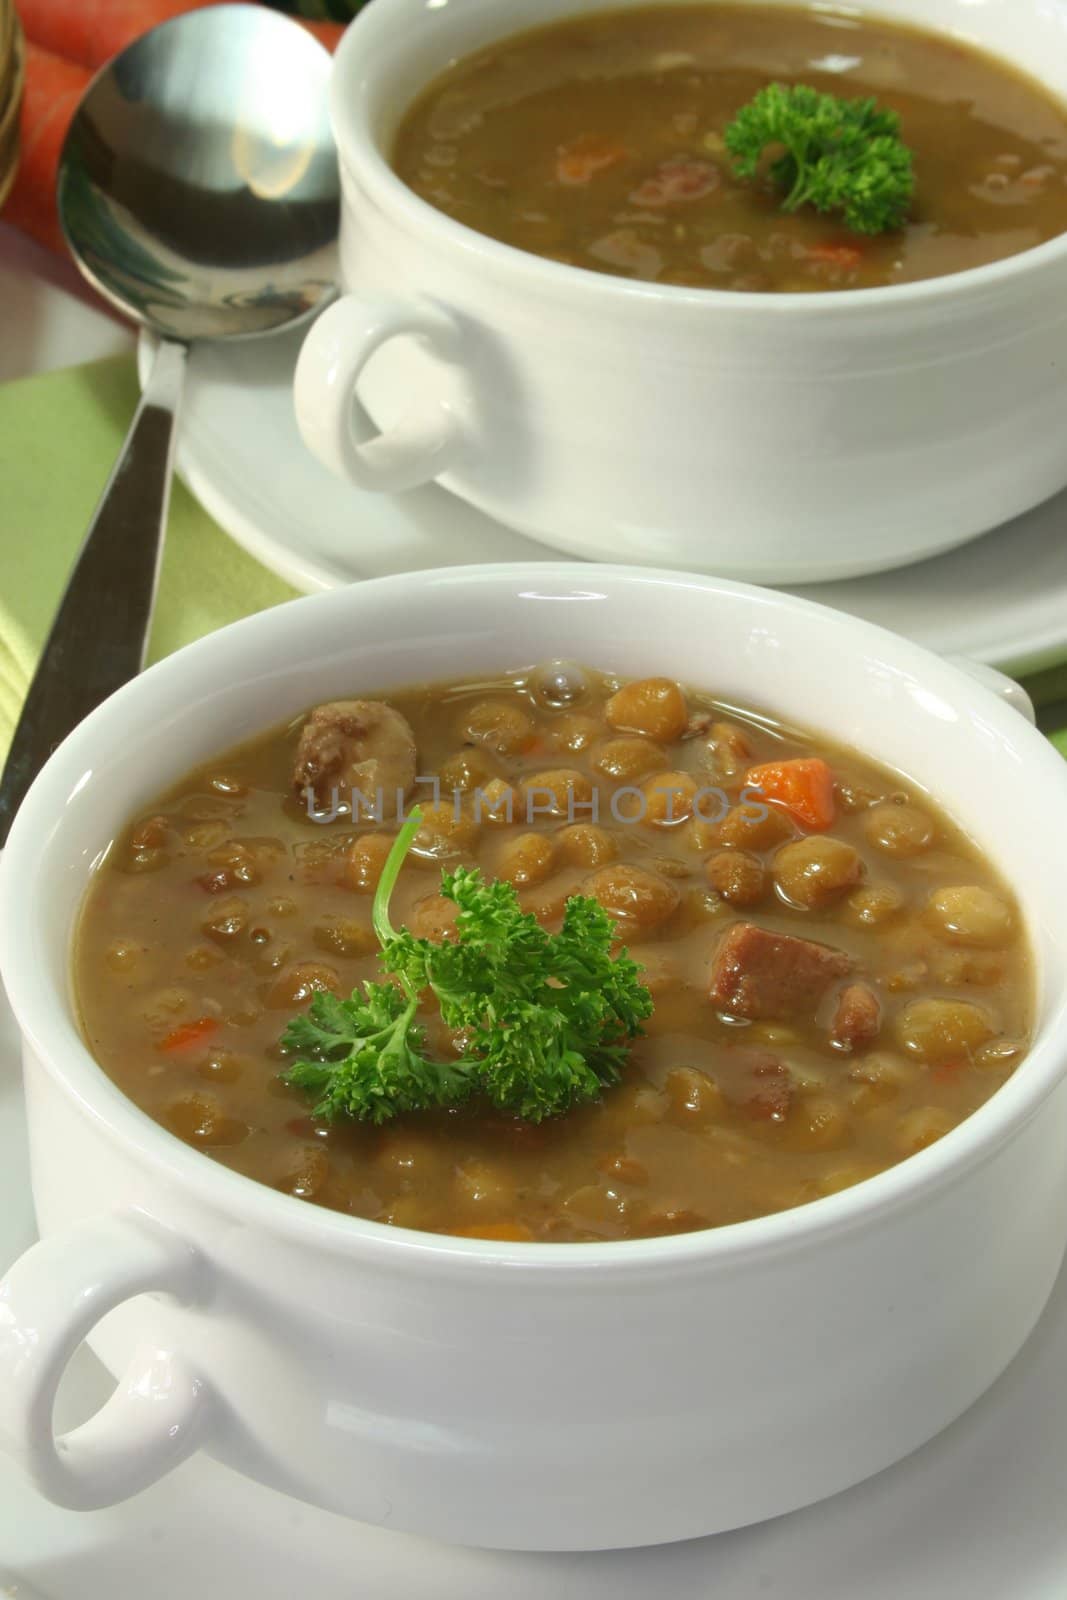 Lentil stew by discovery